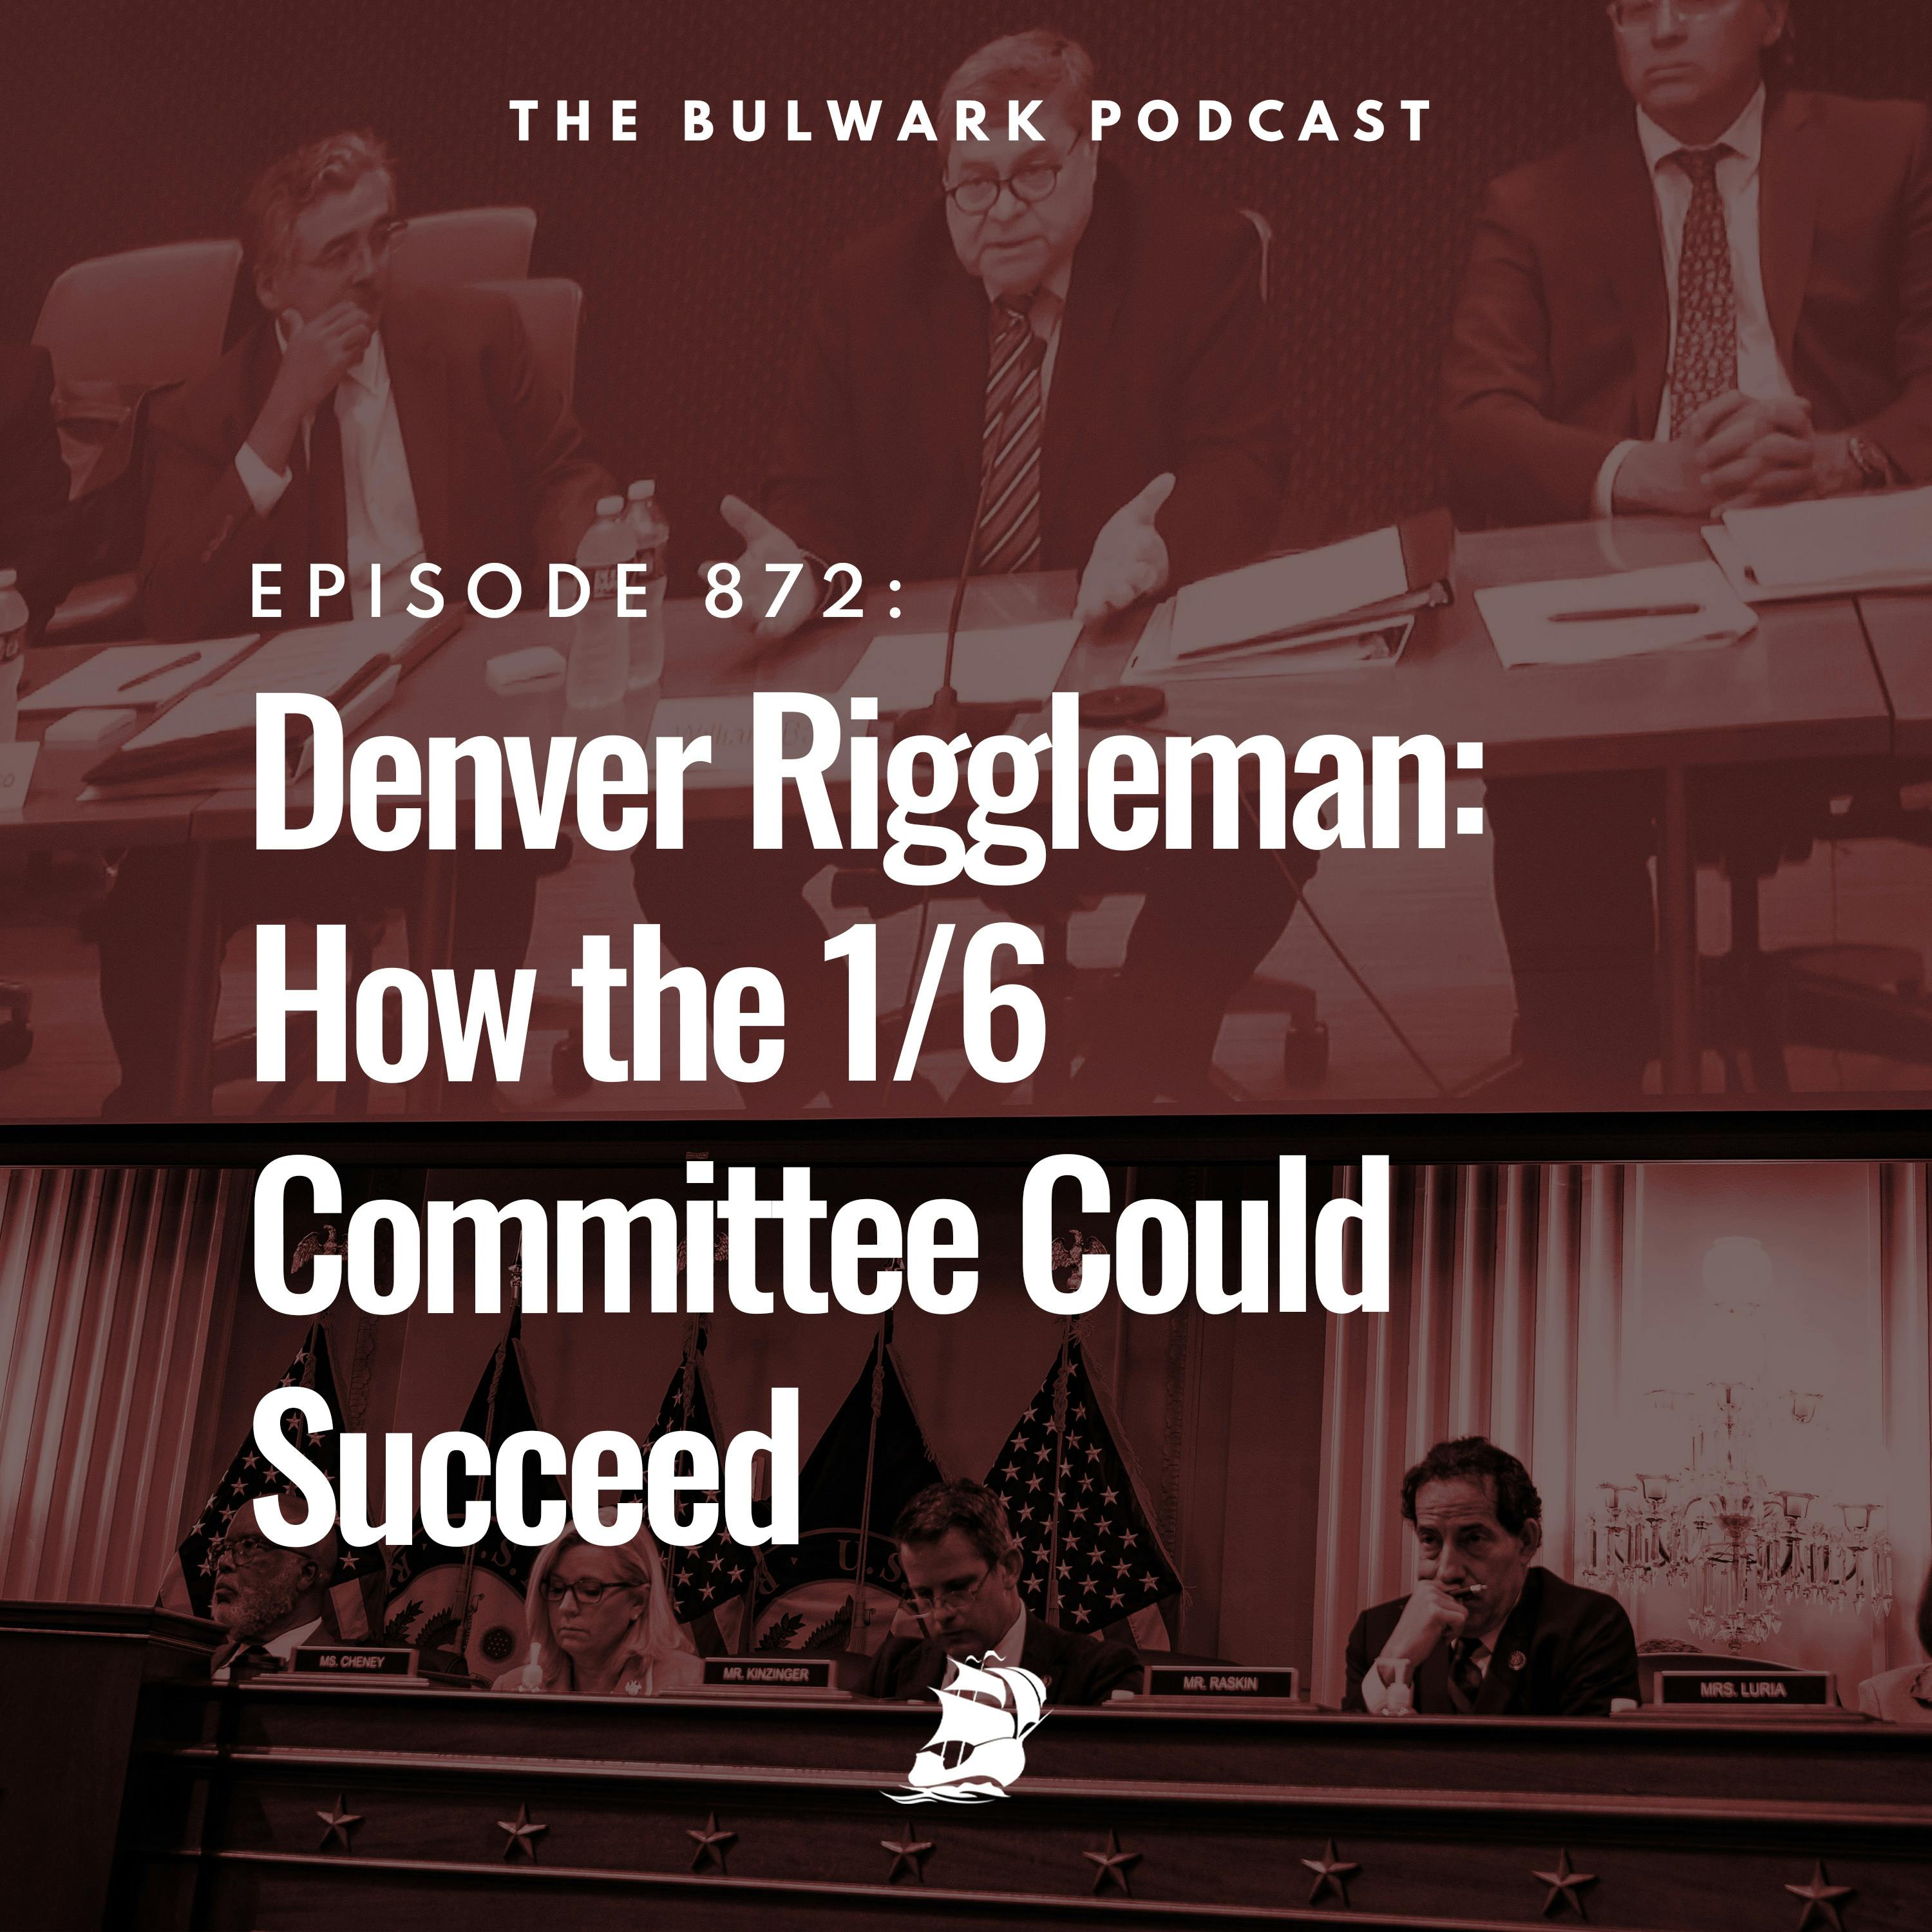 Denver Riggleman: How the 1/6 Committee could succeed